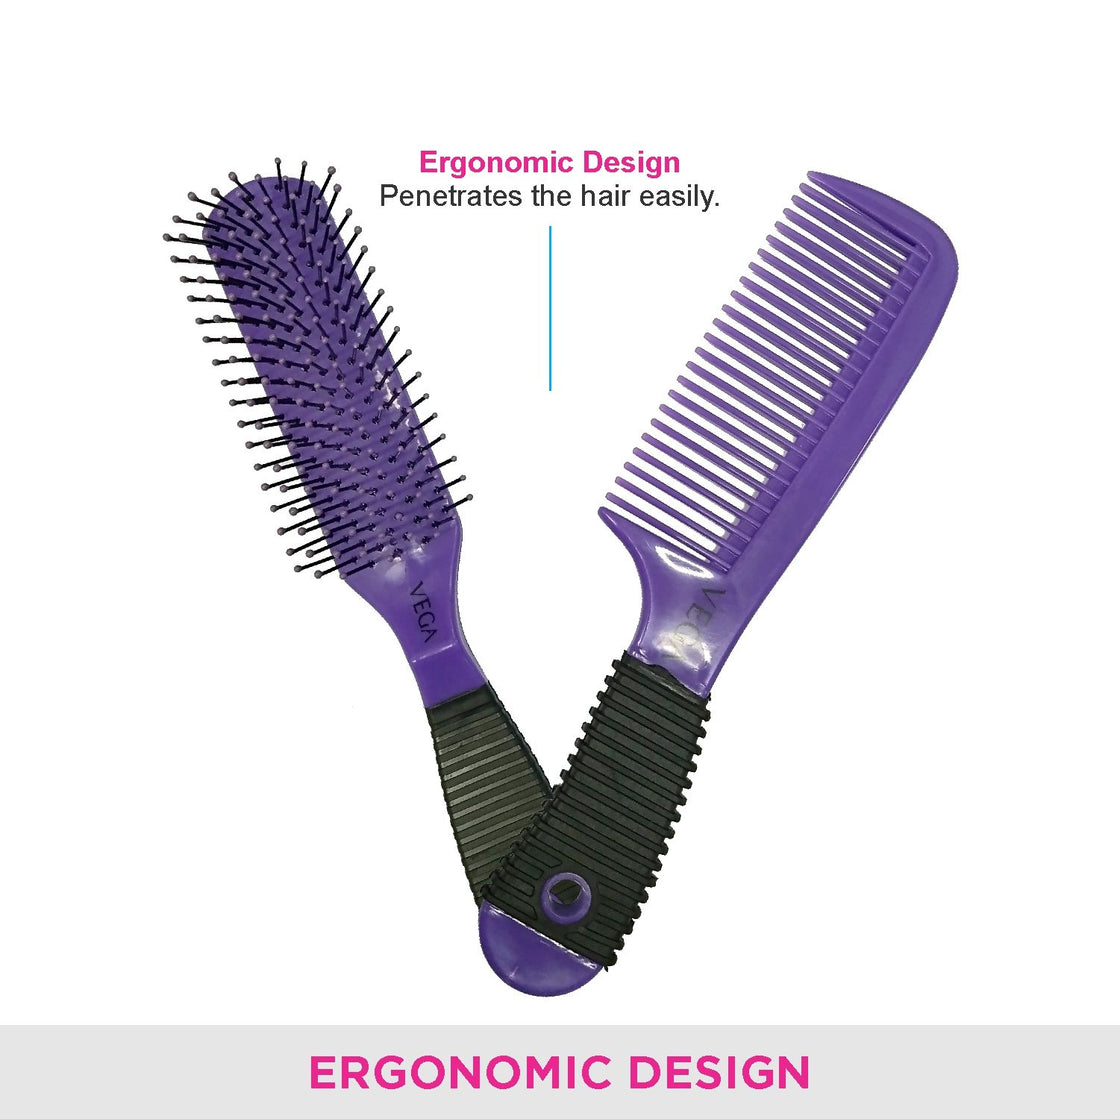 Vega Hair Grooming Set (Hbcs-02)(Color May Vary) Free Comb Worth Rs. 85/--2